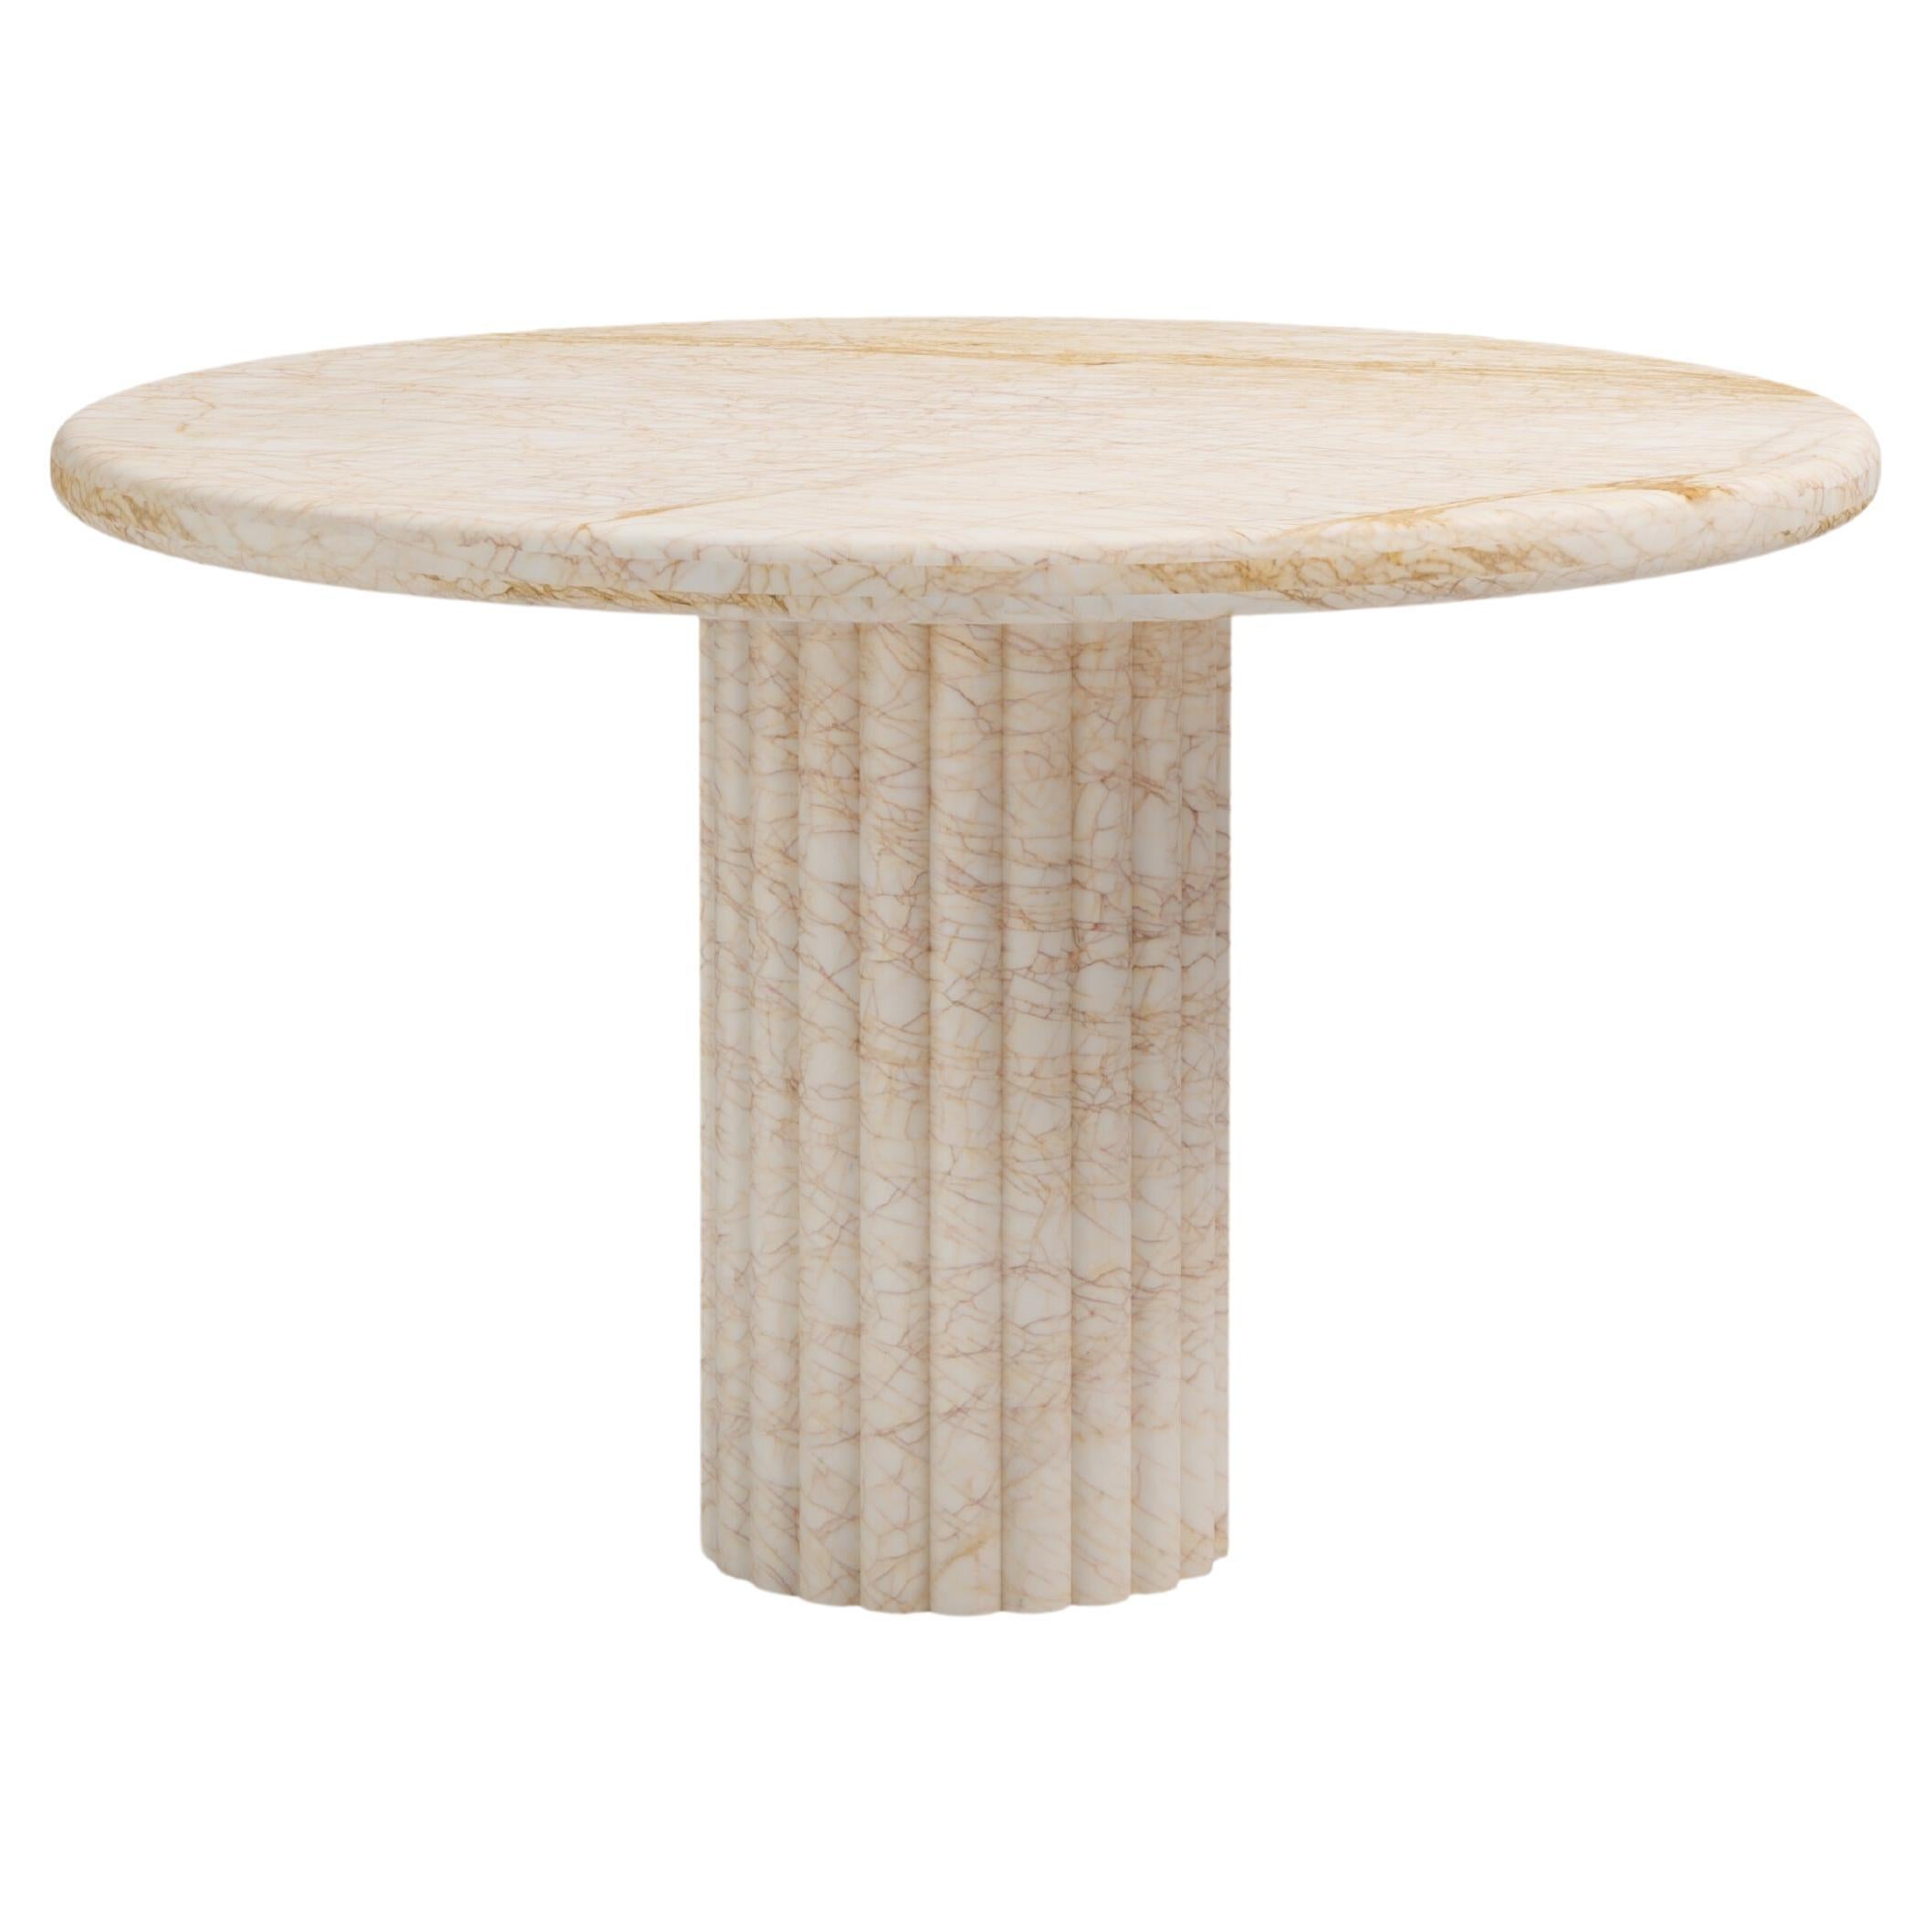 FORM(LA) Fluta Round Dining Table 36”L x 36”W x 30”H Golden Spider Marble For Sale